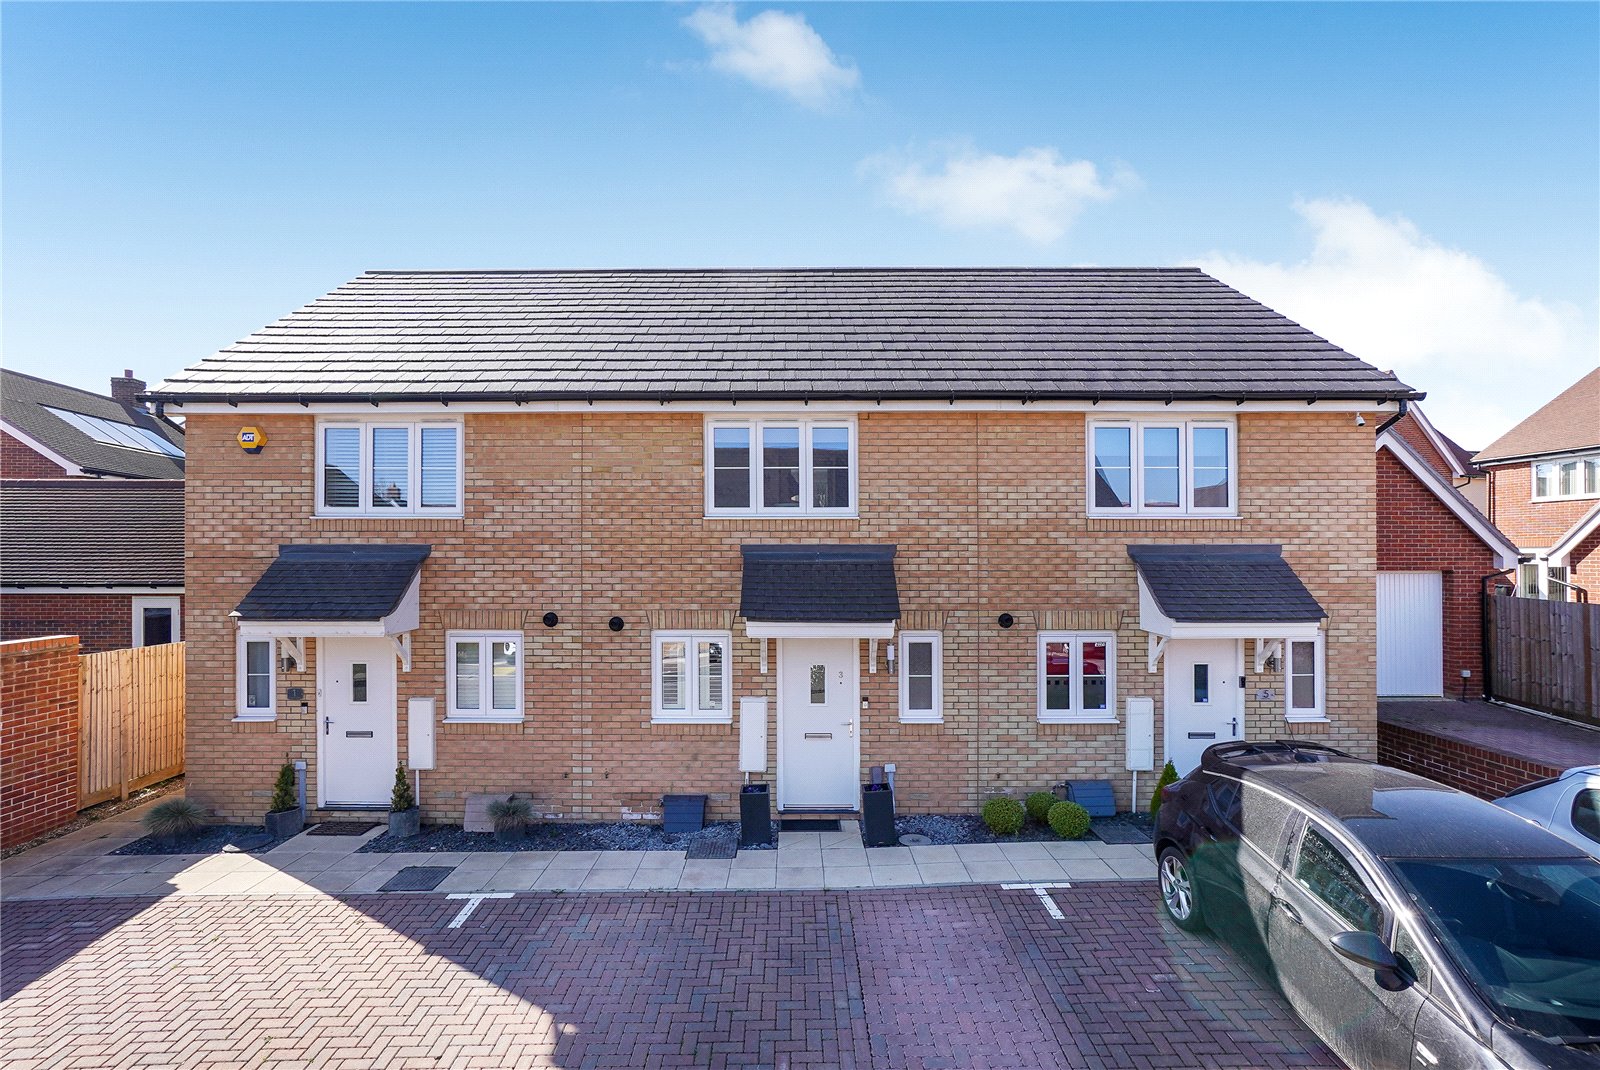 2 bed house for sale in Covert Way, Maidstone, ME16